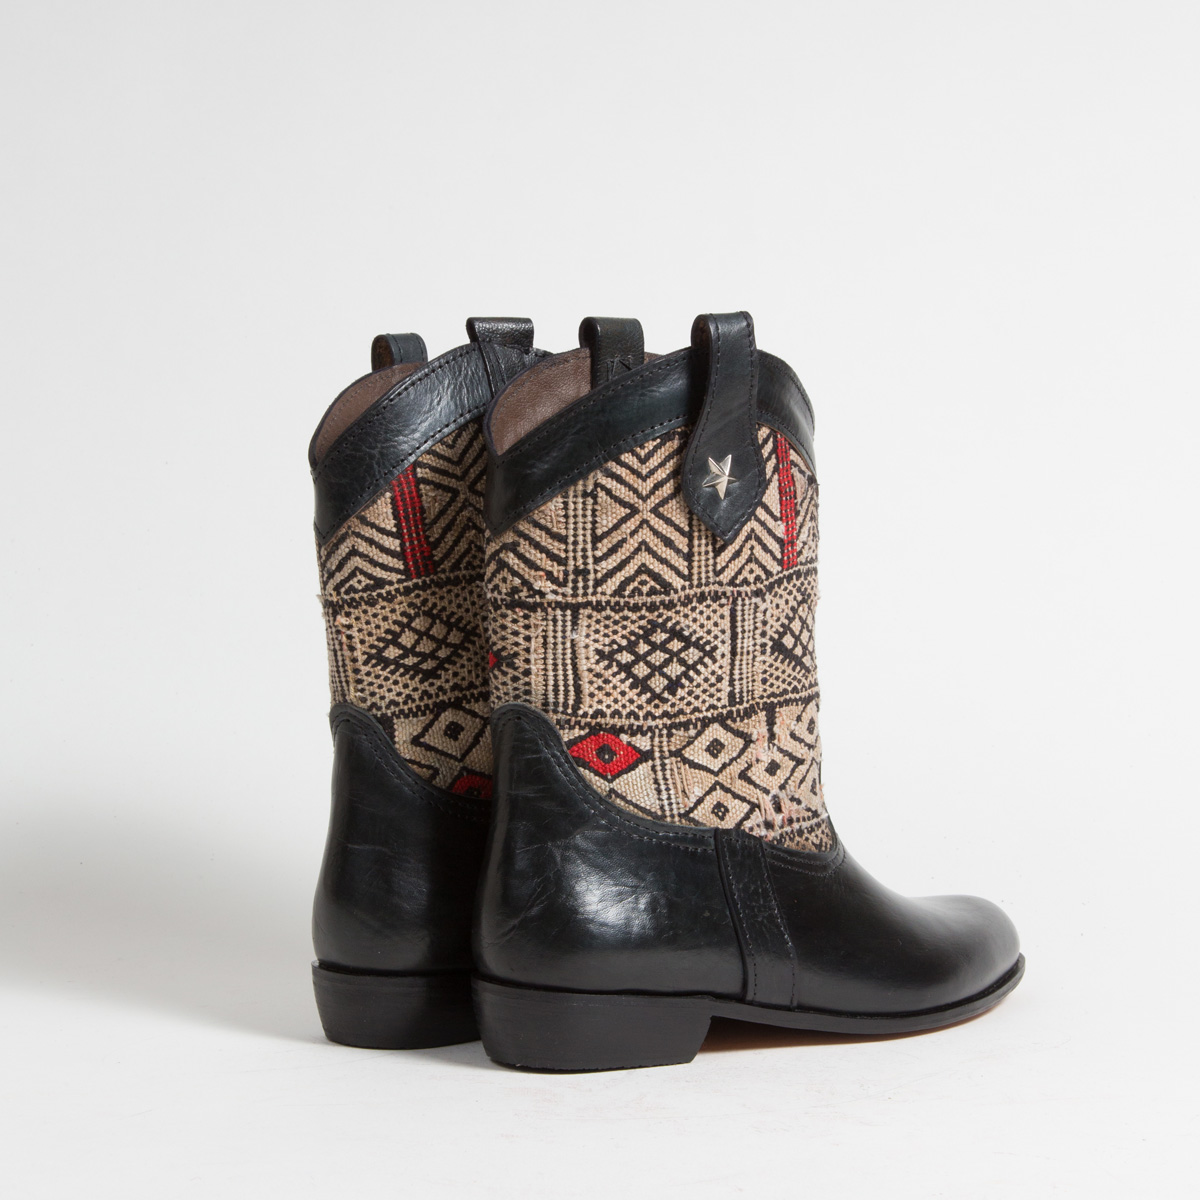 Bottines Kilim cuir mababouche artisanales (Réf. MN15-41)